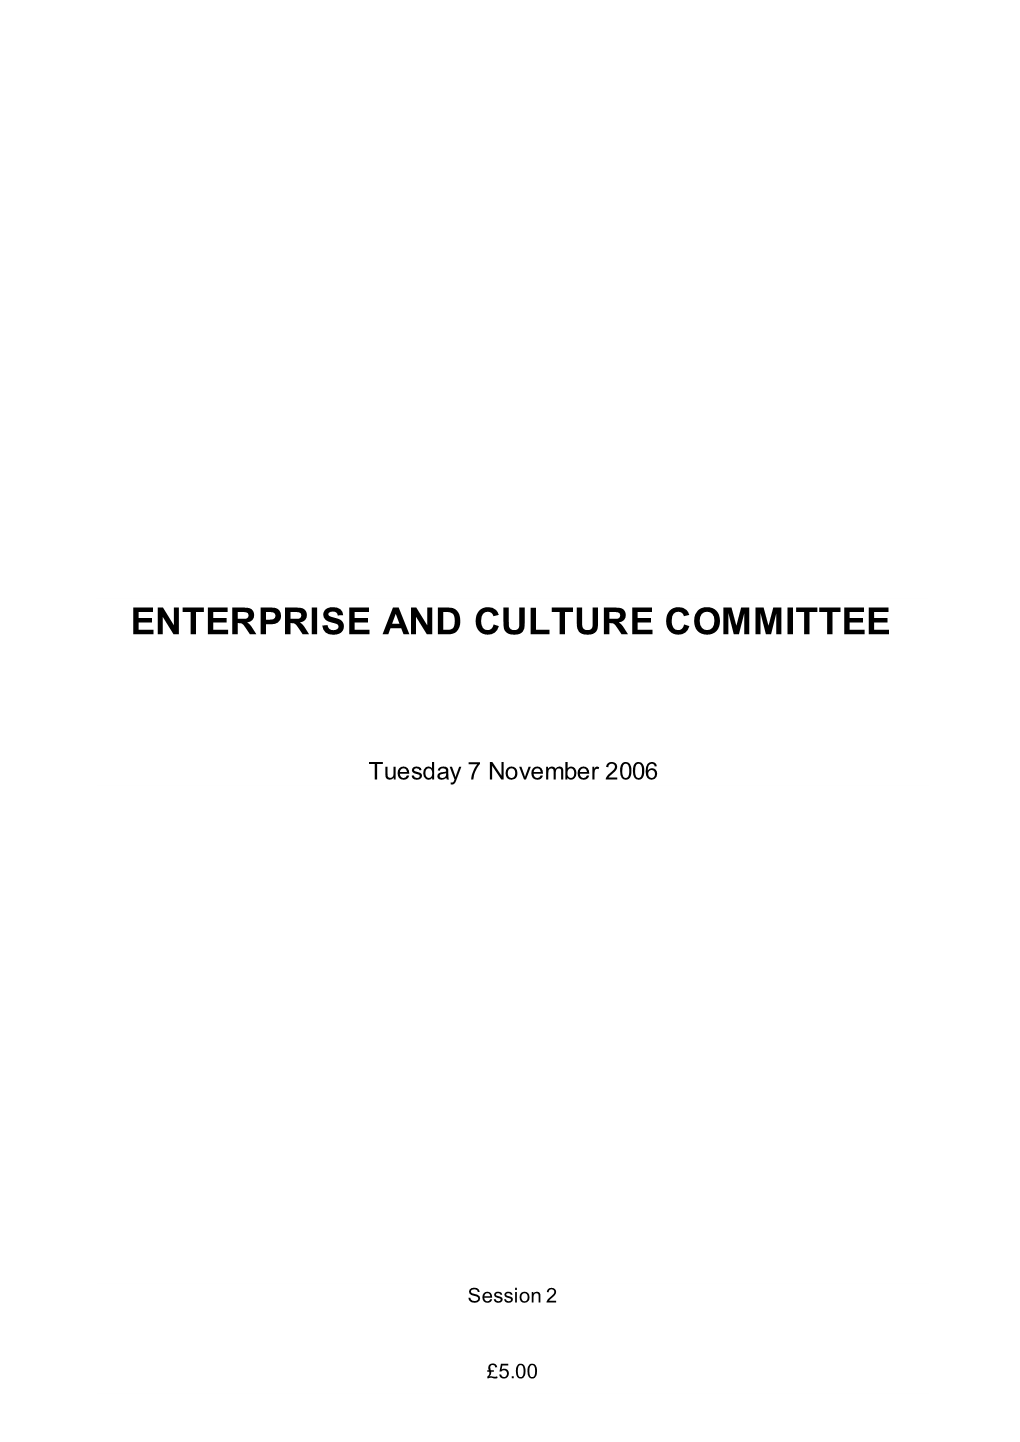 Enterprise and Culture Committee